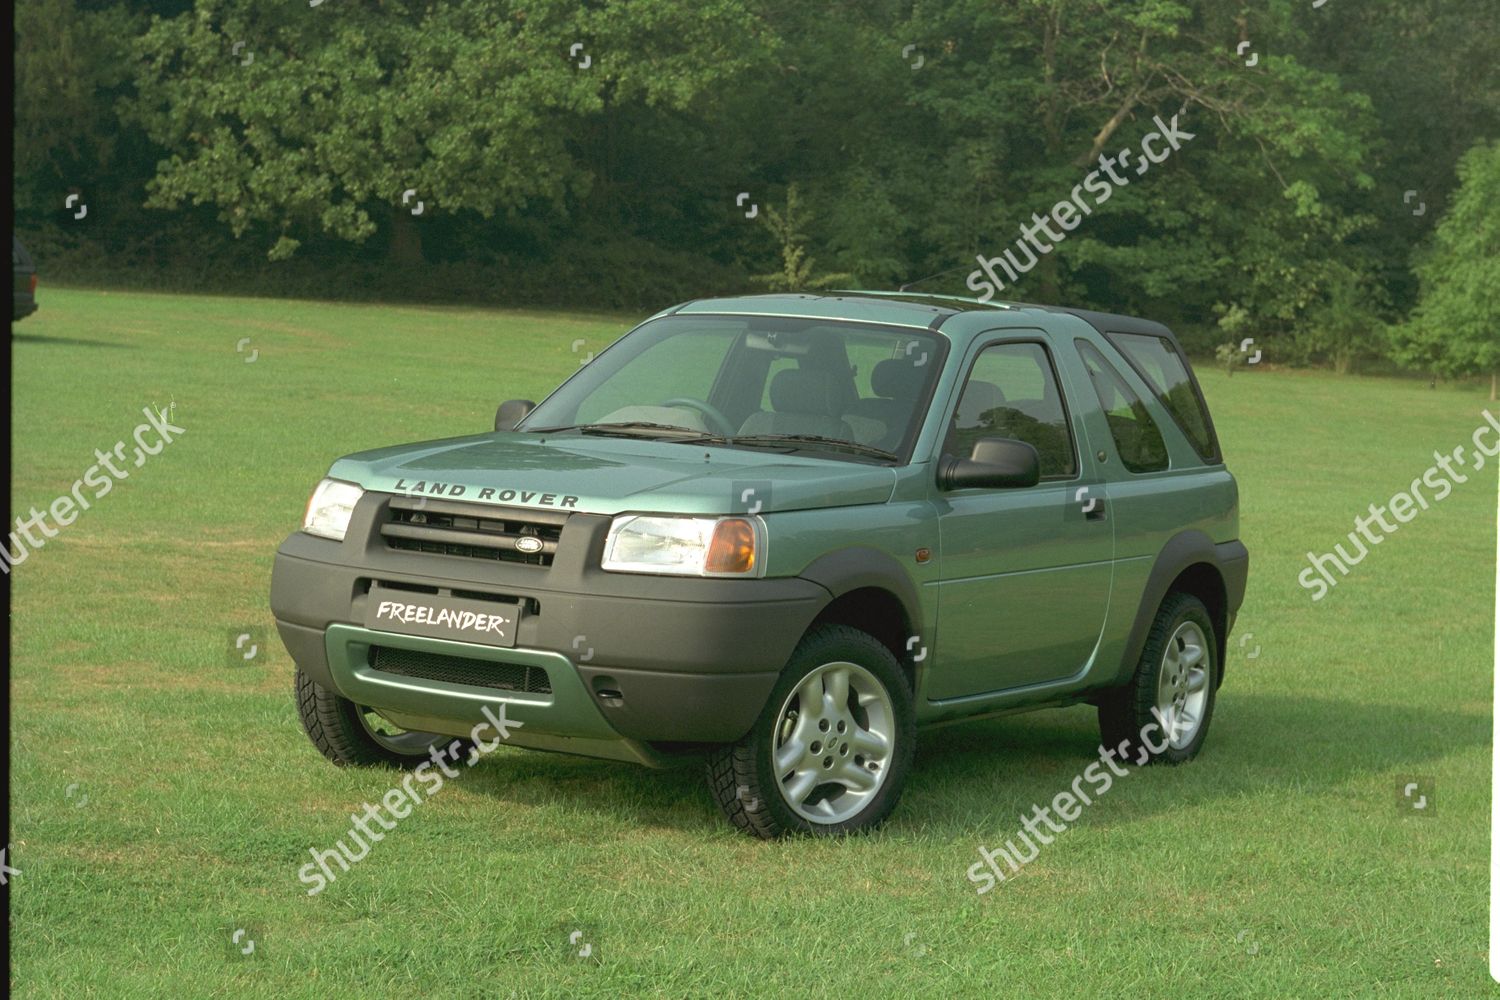 Launch Land Rover Freelander Three Five Editorial Stock Photo - Stock Image  | Shutterstock